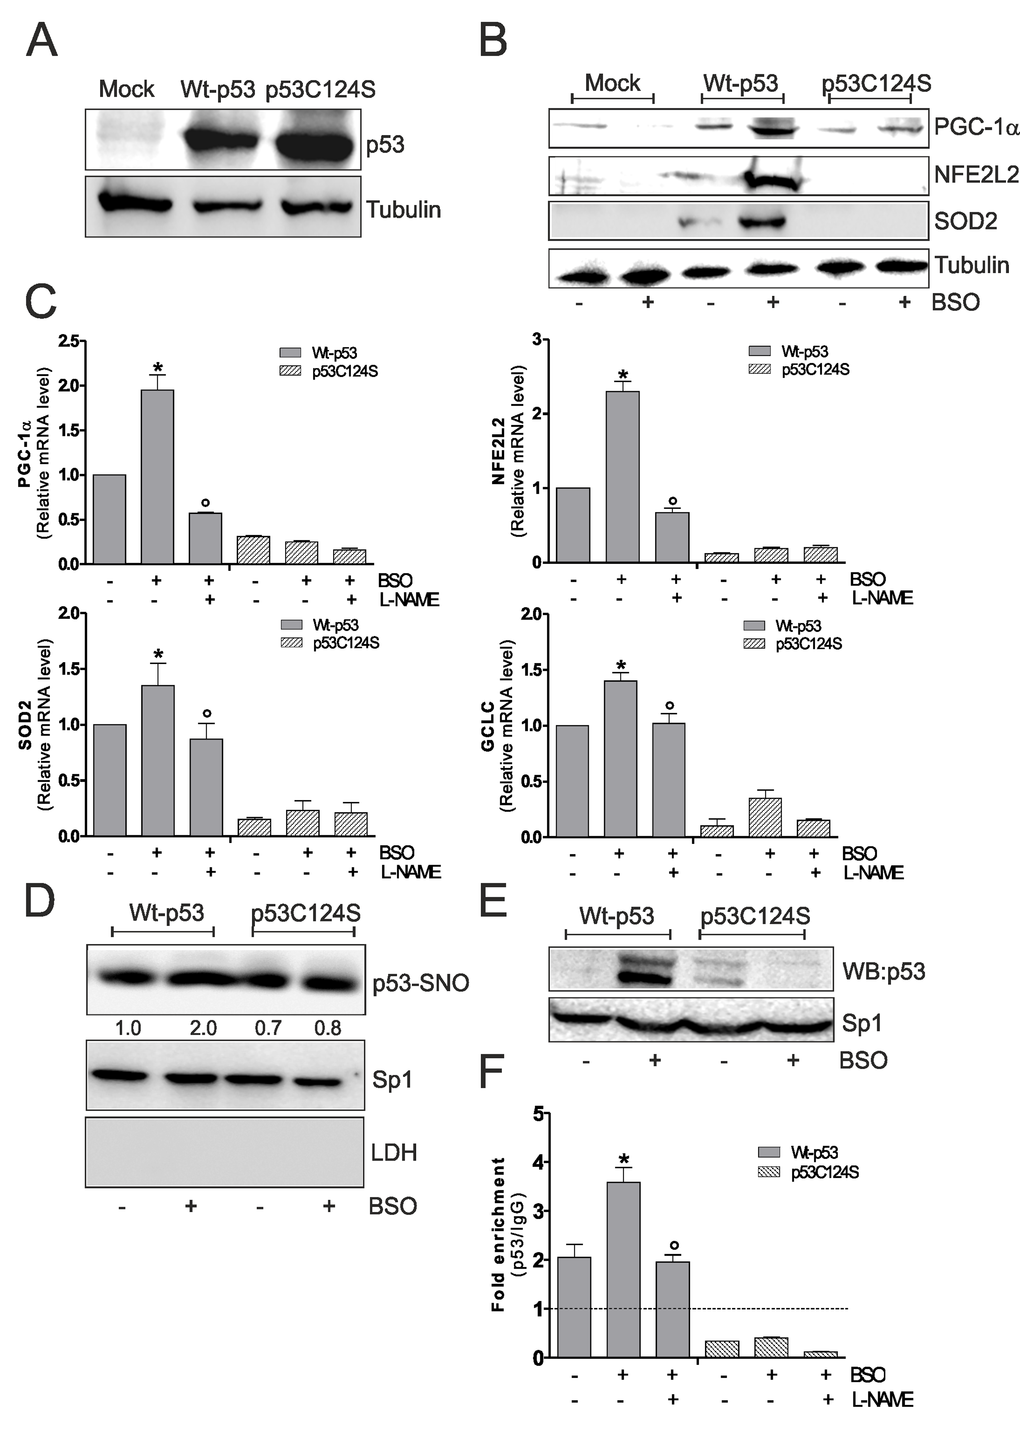 NO/PGC-1α-mediated antioxidant pathway is inhibited after p53C124S overexpression in p53-null NCI-H1299 cells. (A, B) NCI-H1299 cells were transfected with pcDNA3.1 vector containing cDNA for wild type p53 (Wt-p53), single p53 mutant in DBD (p53C124S) or with empty vector (Mock). Cells were lysed and 20 μg of proteins were loaded for Western blot analysis of p53, PGC-1α, NFE2L2 and SOD2. Tubulin was used as loading control. (C) L-NAME (100 μM) was added 1 h before BSO treatment (15 h) and maintained throughout the experiment. Total RNA was isolated and relative mRNA levels of PGC-1α, NFE2L2, SOD2 and GCLC were analyzed by RT-qPCR. Data are expressed as means ± S.D. (n=3; *pvs untreated Wt-p53; °pvs BSO-treated Wt-p53 cells). (D) Nuclear proteins (500 μg) were subject to S-NO derivatization with biotin. After Western blot the nitrocellulose was incubated with p53 antibody for detection of p53-SNO. Sp1 was used as loading control. The possible presence of cytoplasmic contaminants was tested by incubating nitrocellulose with rabbit anti-LDH. Numbers indicate the density of immunoreactive bands calculated using the Software Quantity one (Bio-Rad) and reported as the ratio of p53-SNO/Sp1. (E) Nuclear protein extracts (500 μg) were subjected to oligo-pull-down by using the biotinylated oligonucleotide representing the p53RE on the PPARGC1A promoter and bound p53 was detected by Western blot. Twenty μg of nuclear proteins (input) were used for Western blot analysis of Sp1. (F) ChIP assay was carried out on cross-linked nuclei from Wt-p53 and p53C124S NCI-H1299 cells using p53 antibody followed by qPCR analysis of p53RE. Dashed line indicates the value of IgG control. Data are expressed as means ± S.D. (n=4; *pvs untreated Wt-p53; °pvs BSO-treated Wt-p53 cells). All the immunoblots reported are from one experiment representative of four that gave similar results.